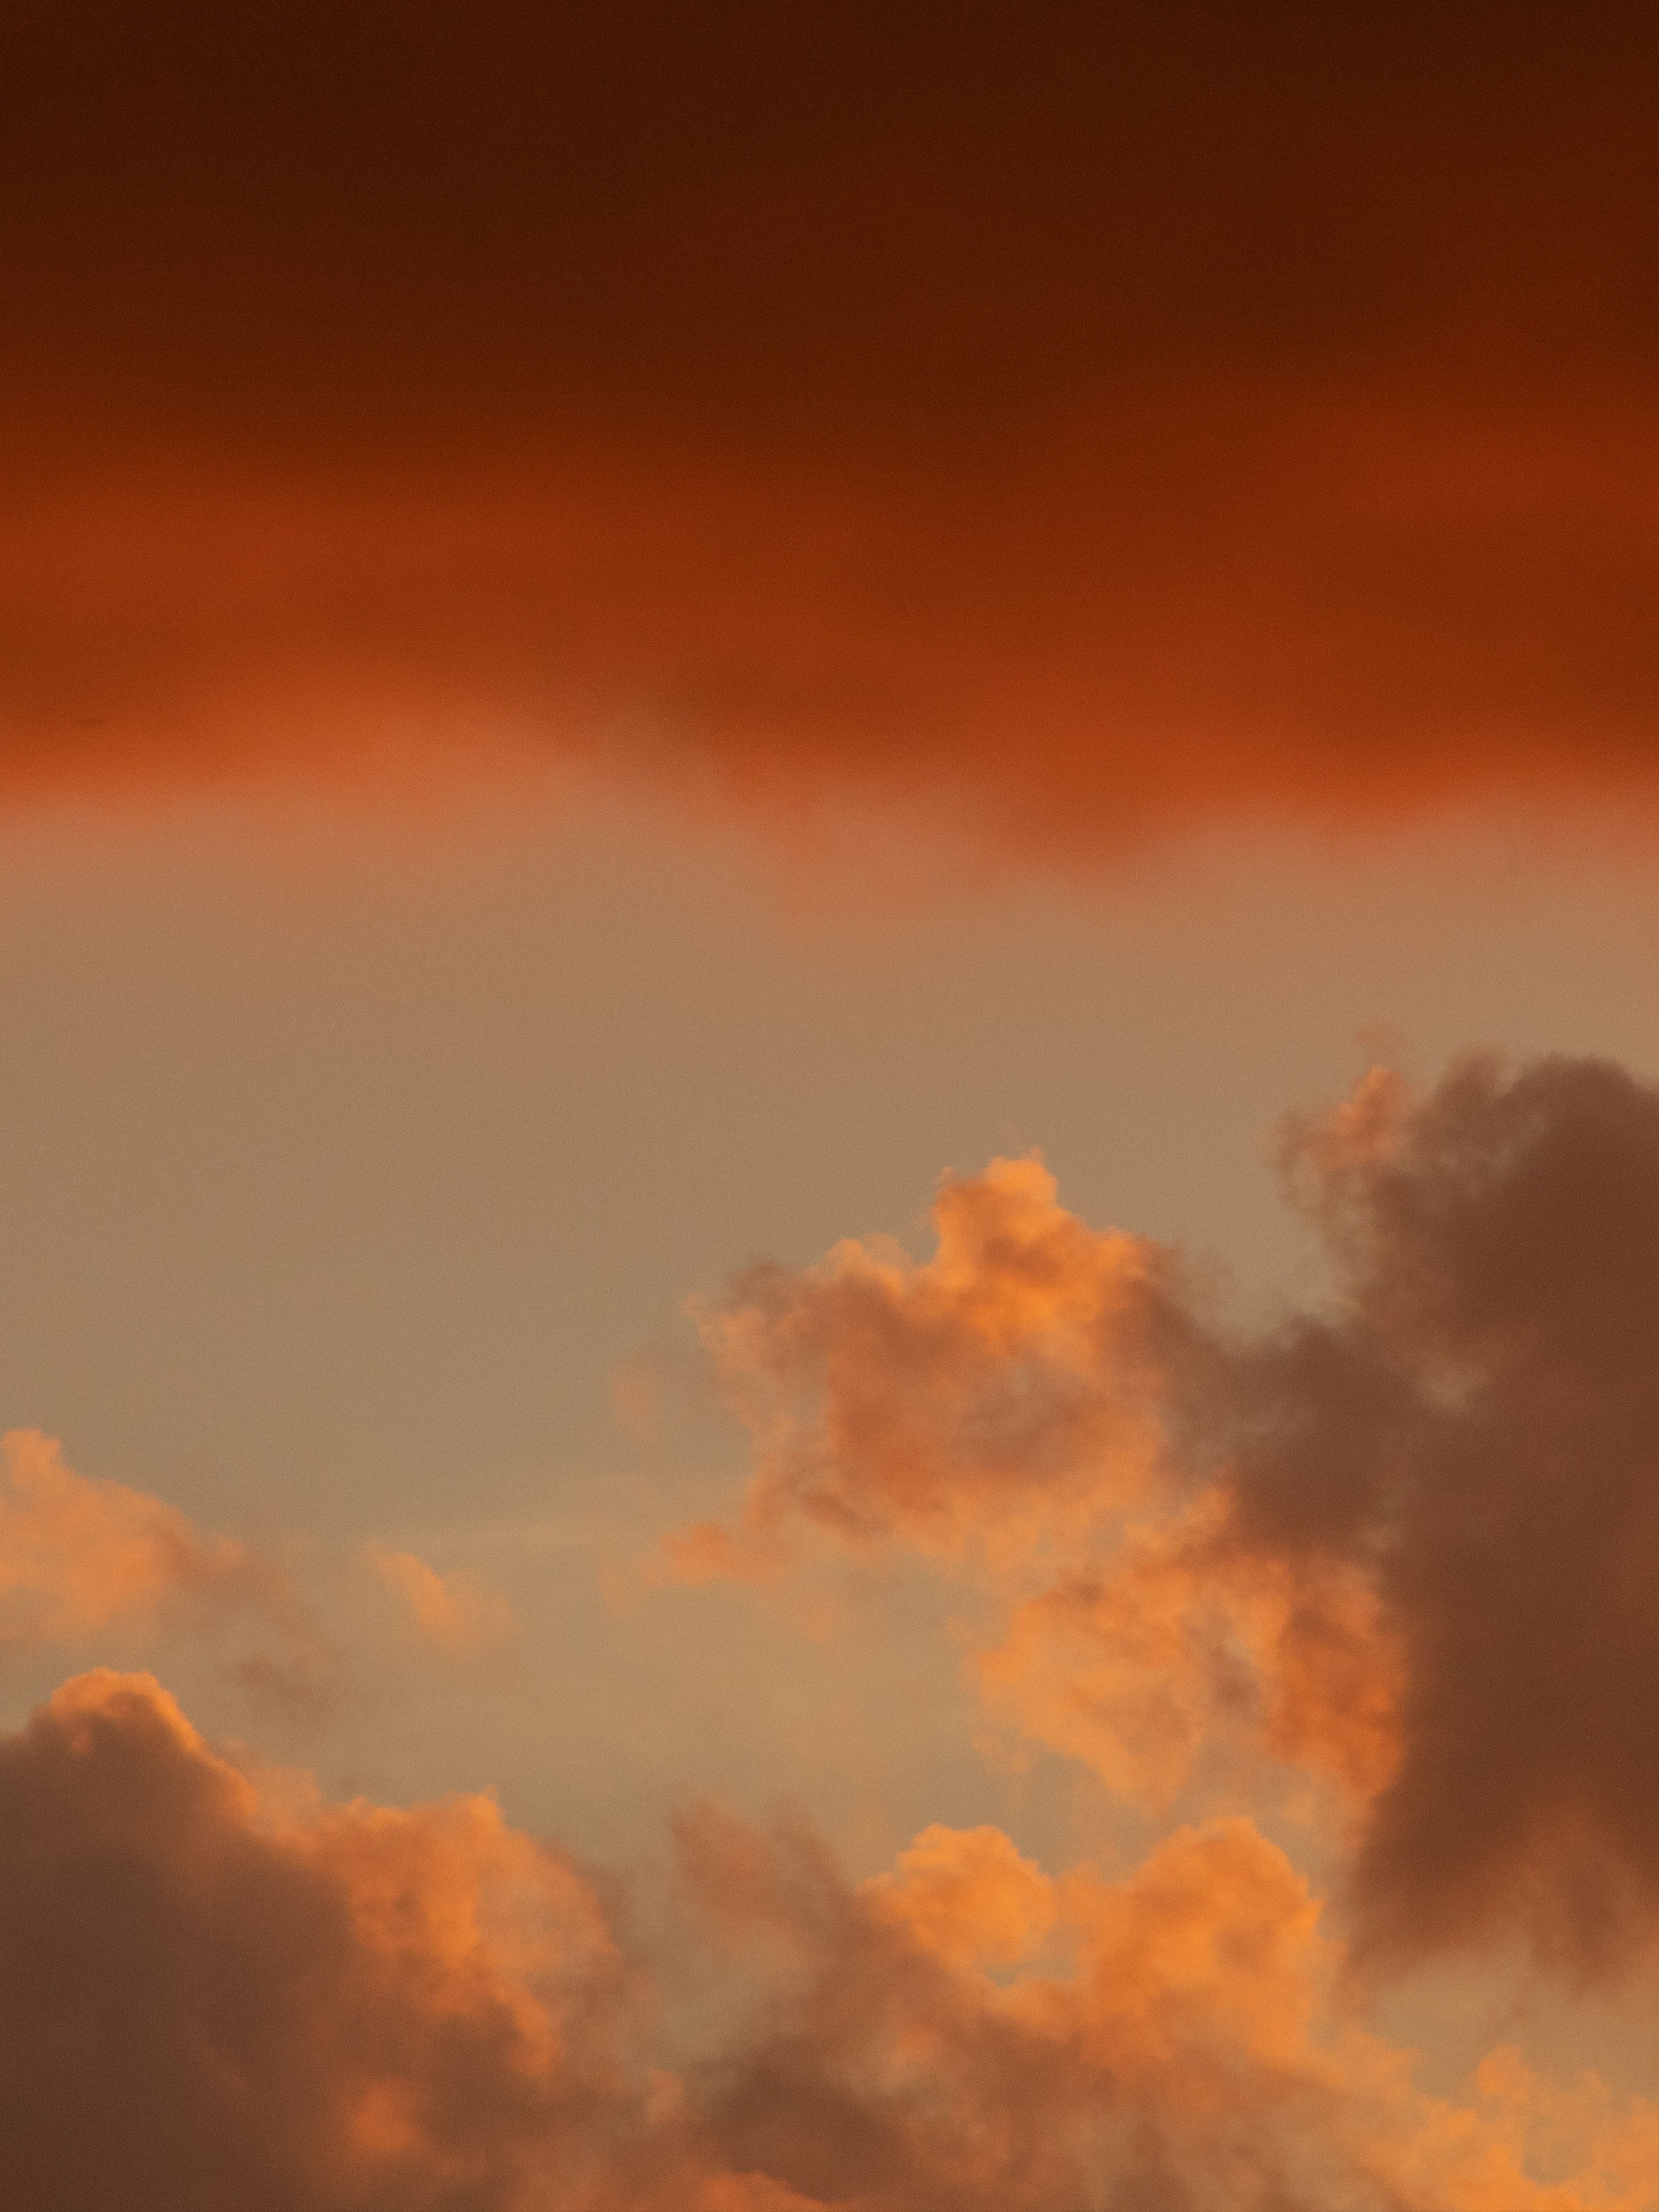 A beautiful orange and red sunset sky with clouds. - Pastel orange, cloud, sky